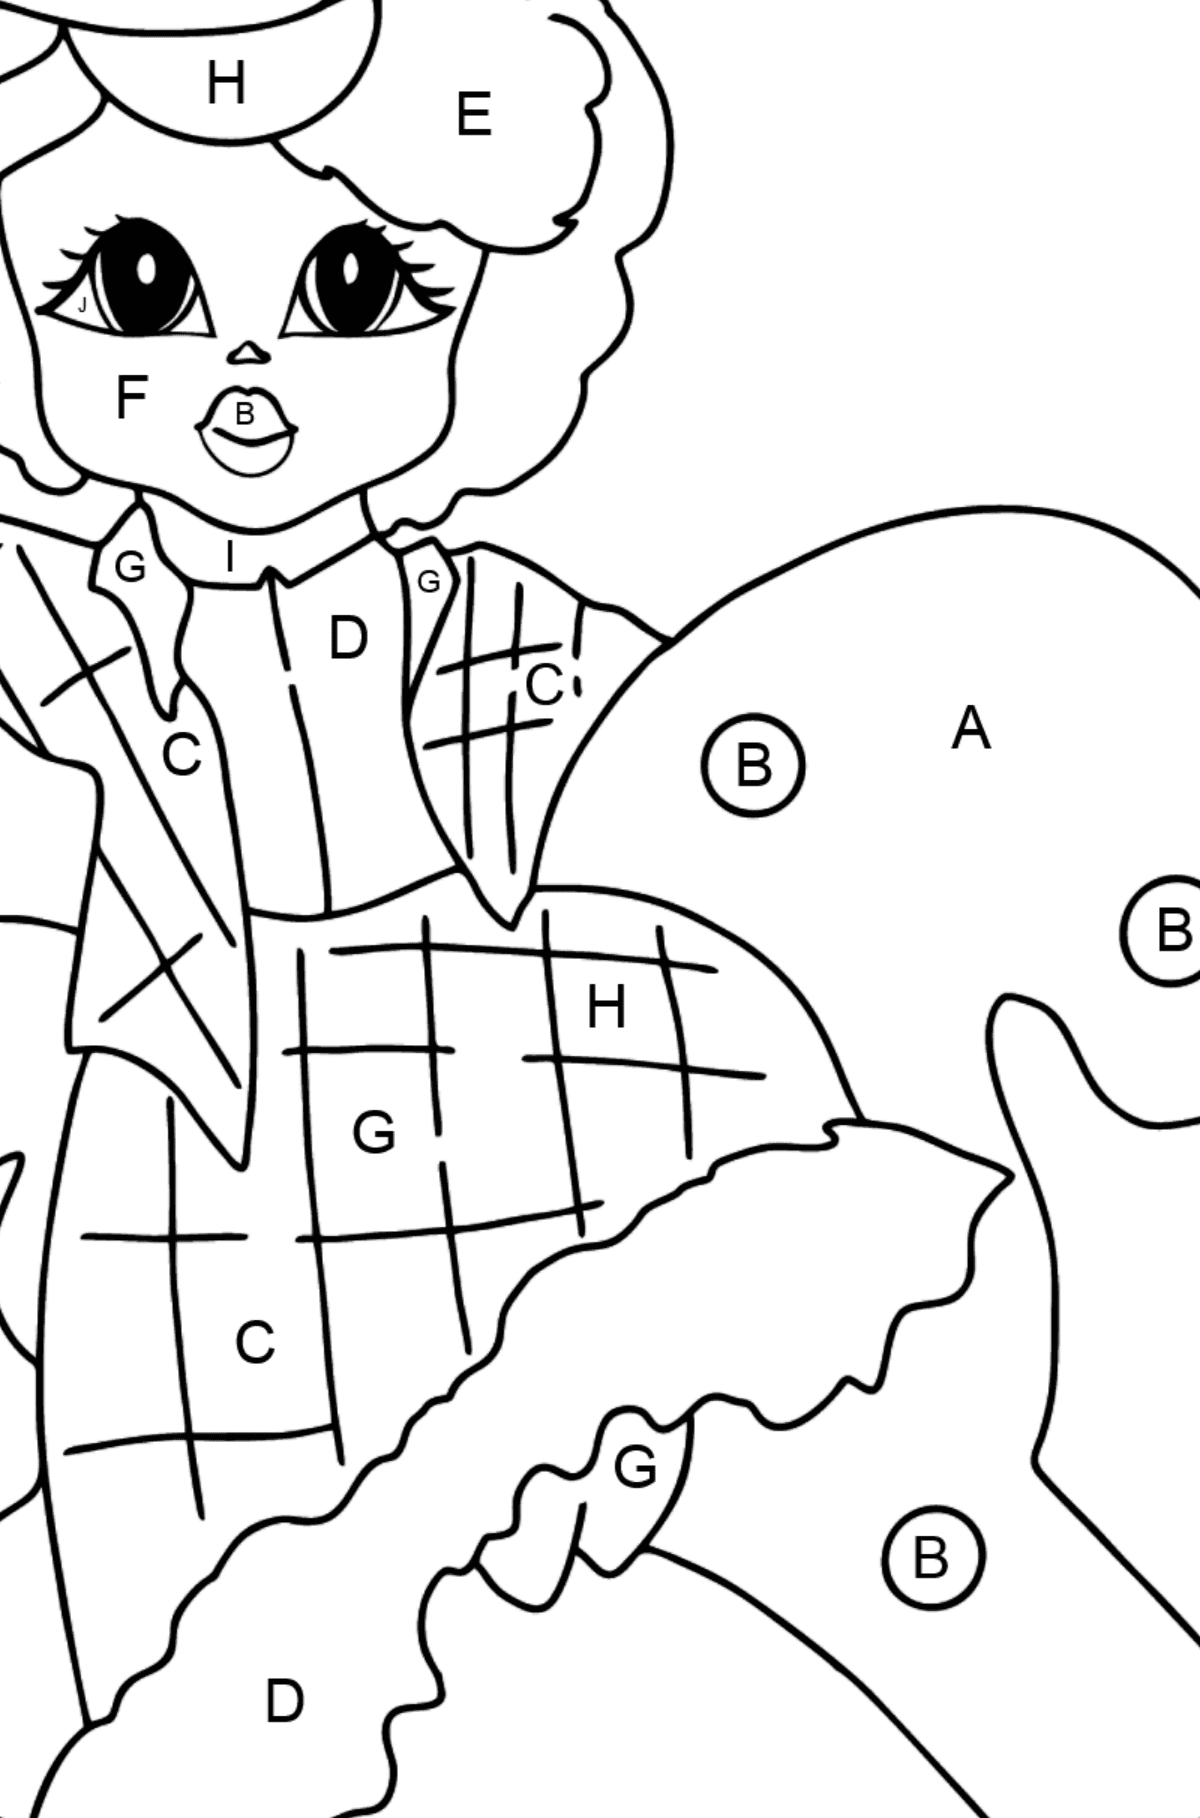 Coloring Page - A Princess on a Horse - Coloring by Letters for Kids